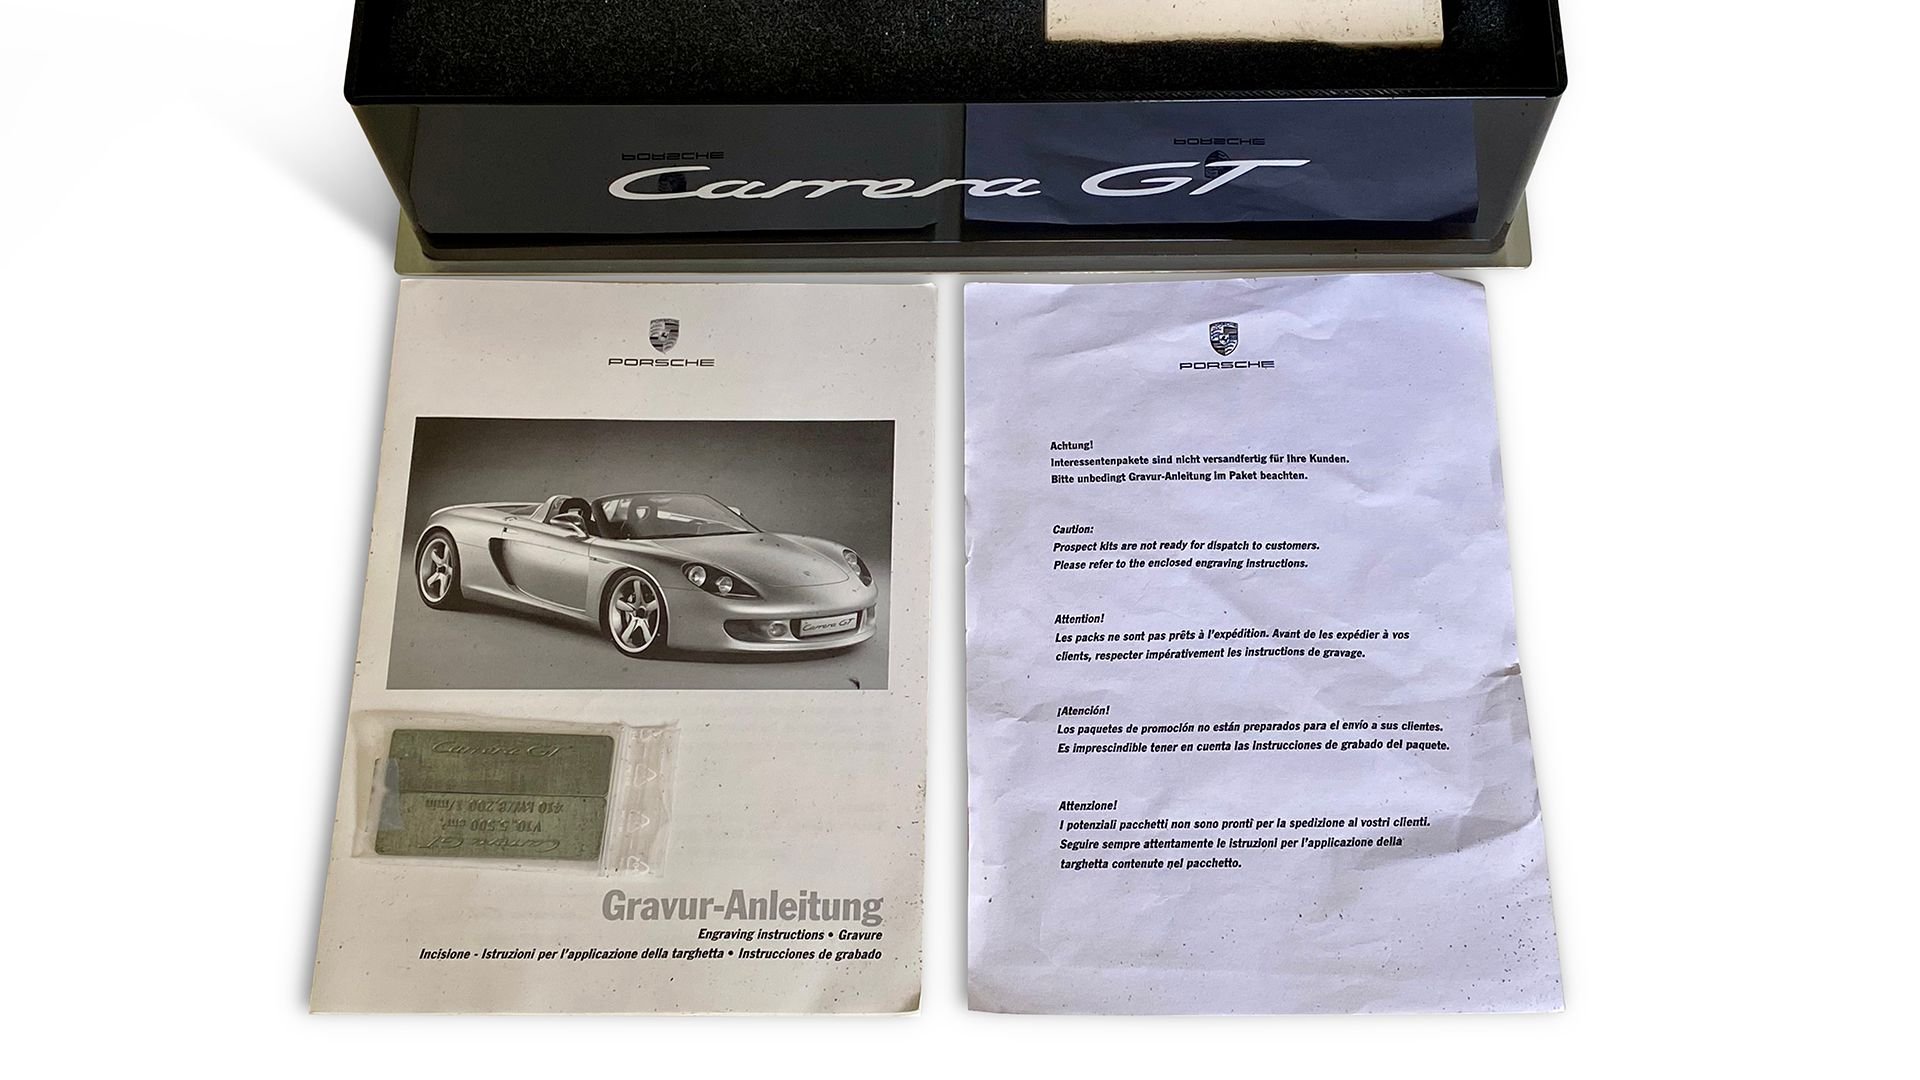 For Sale Porsche Carrera GT VIP Pre-Delivery Order and Delivery Items